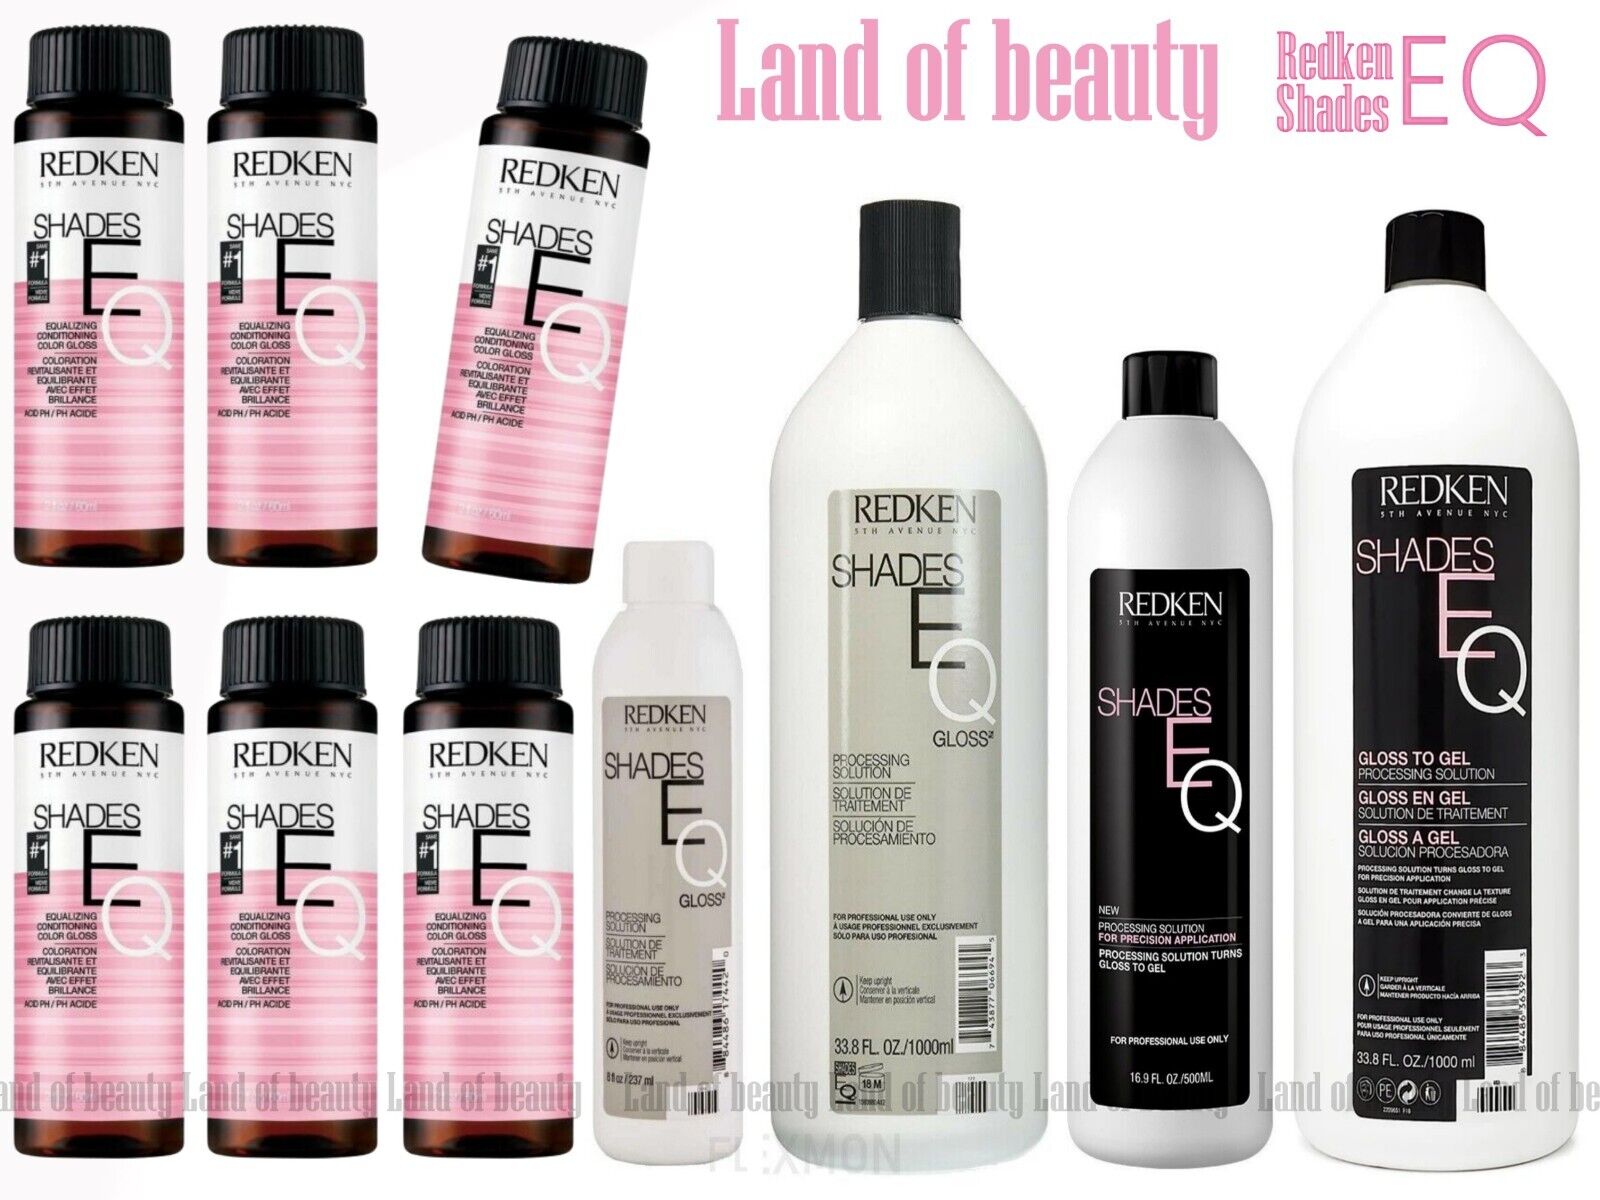 Redken Shades EQ Gloss Demi Hair color 2oz or Solution 8oz/ 1L ☆Choose Yours